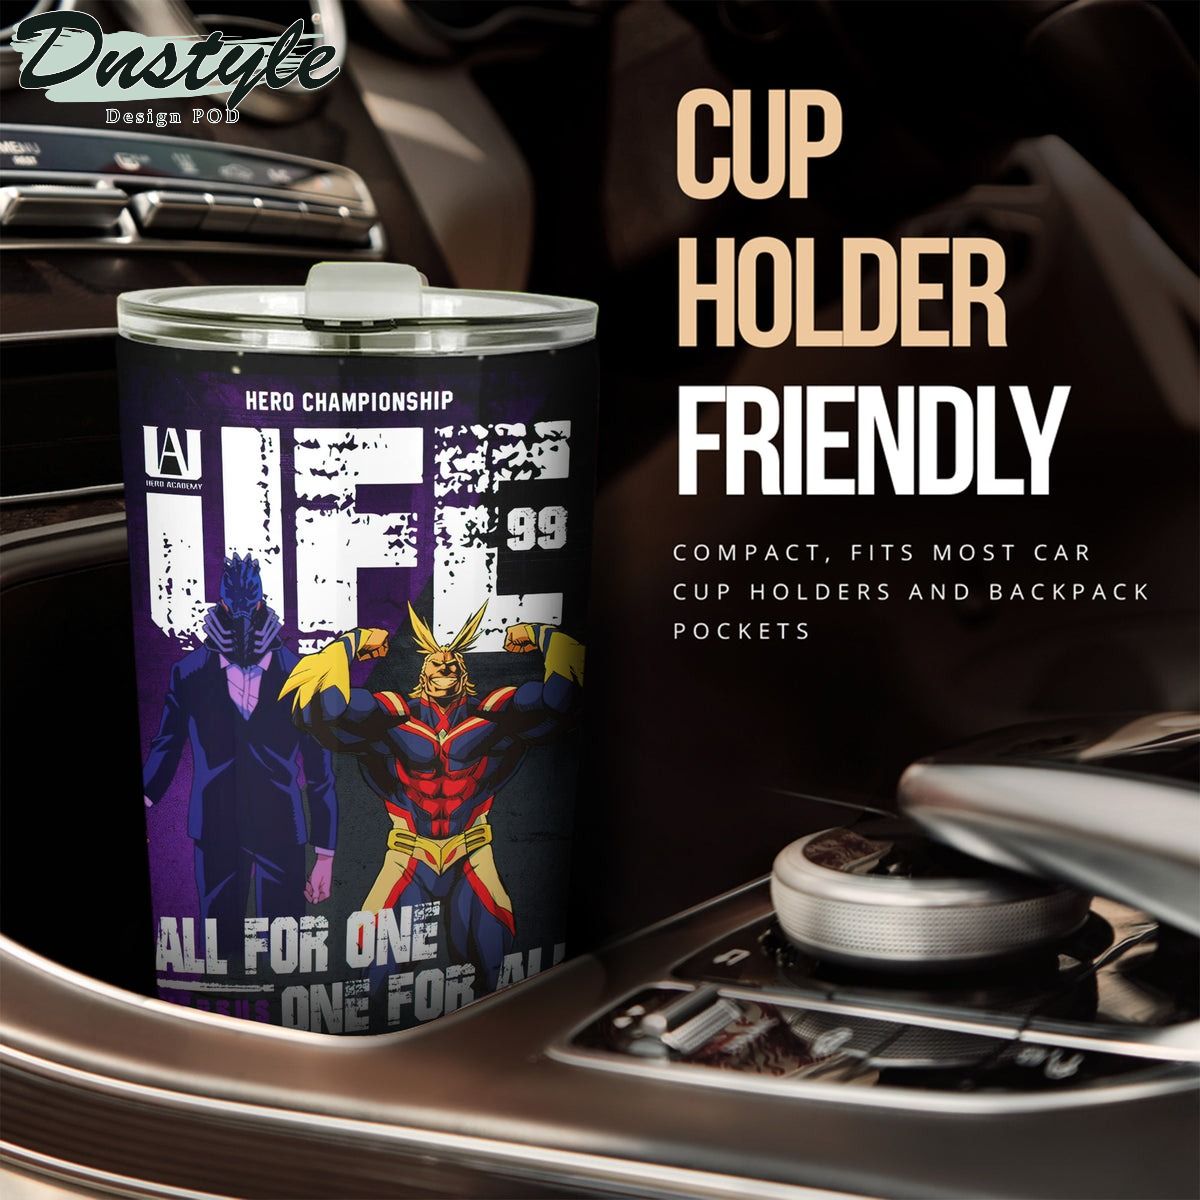 My Hero Academia All For One Tumbler